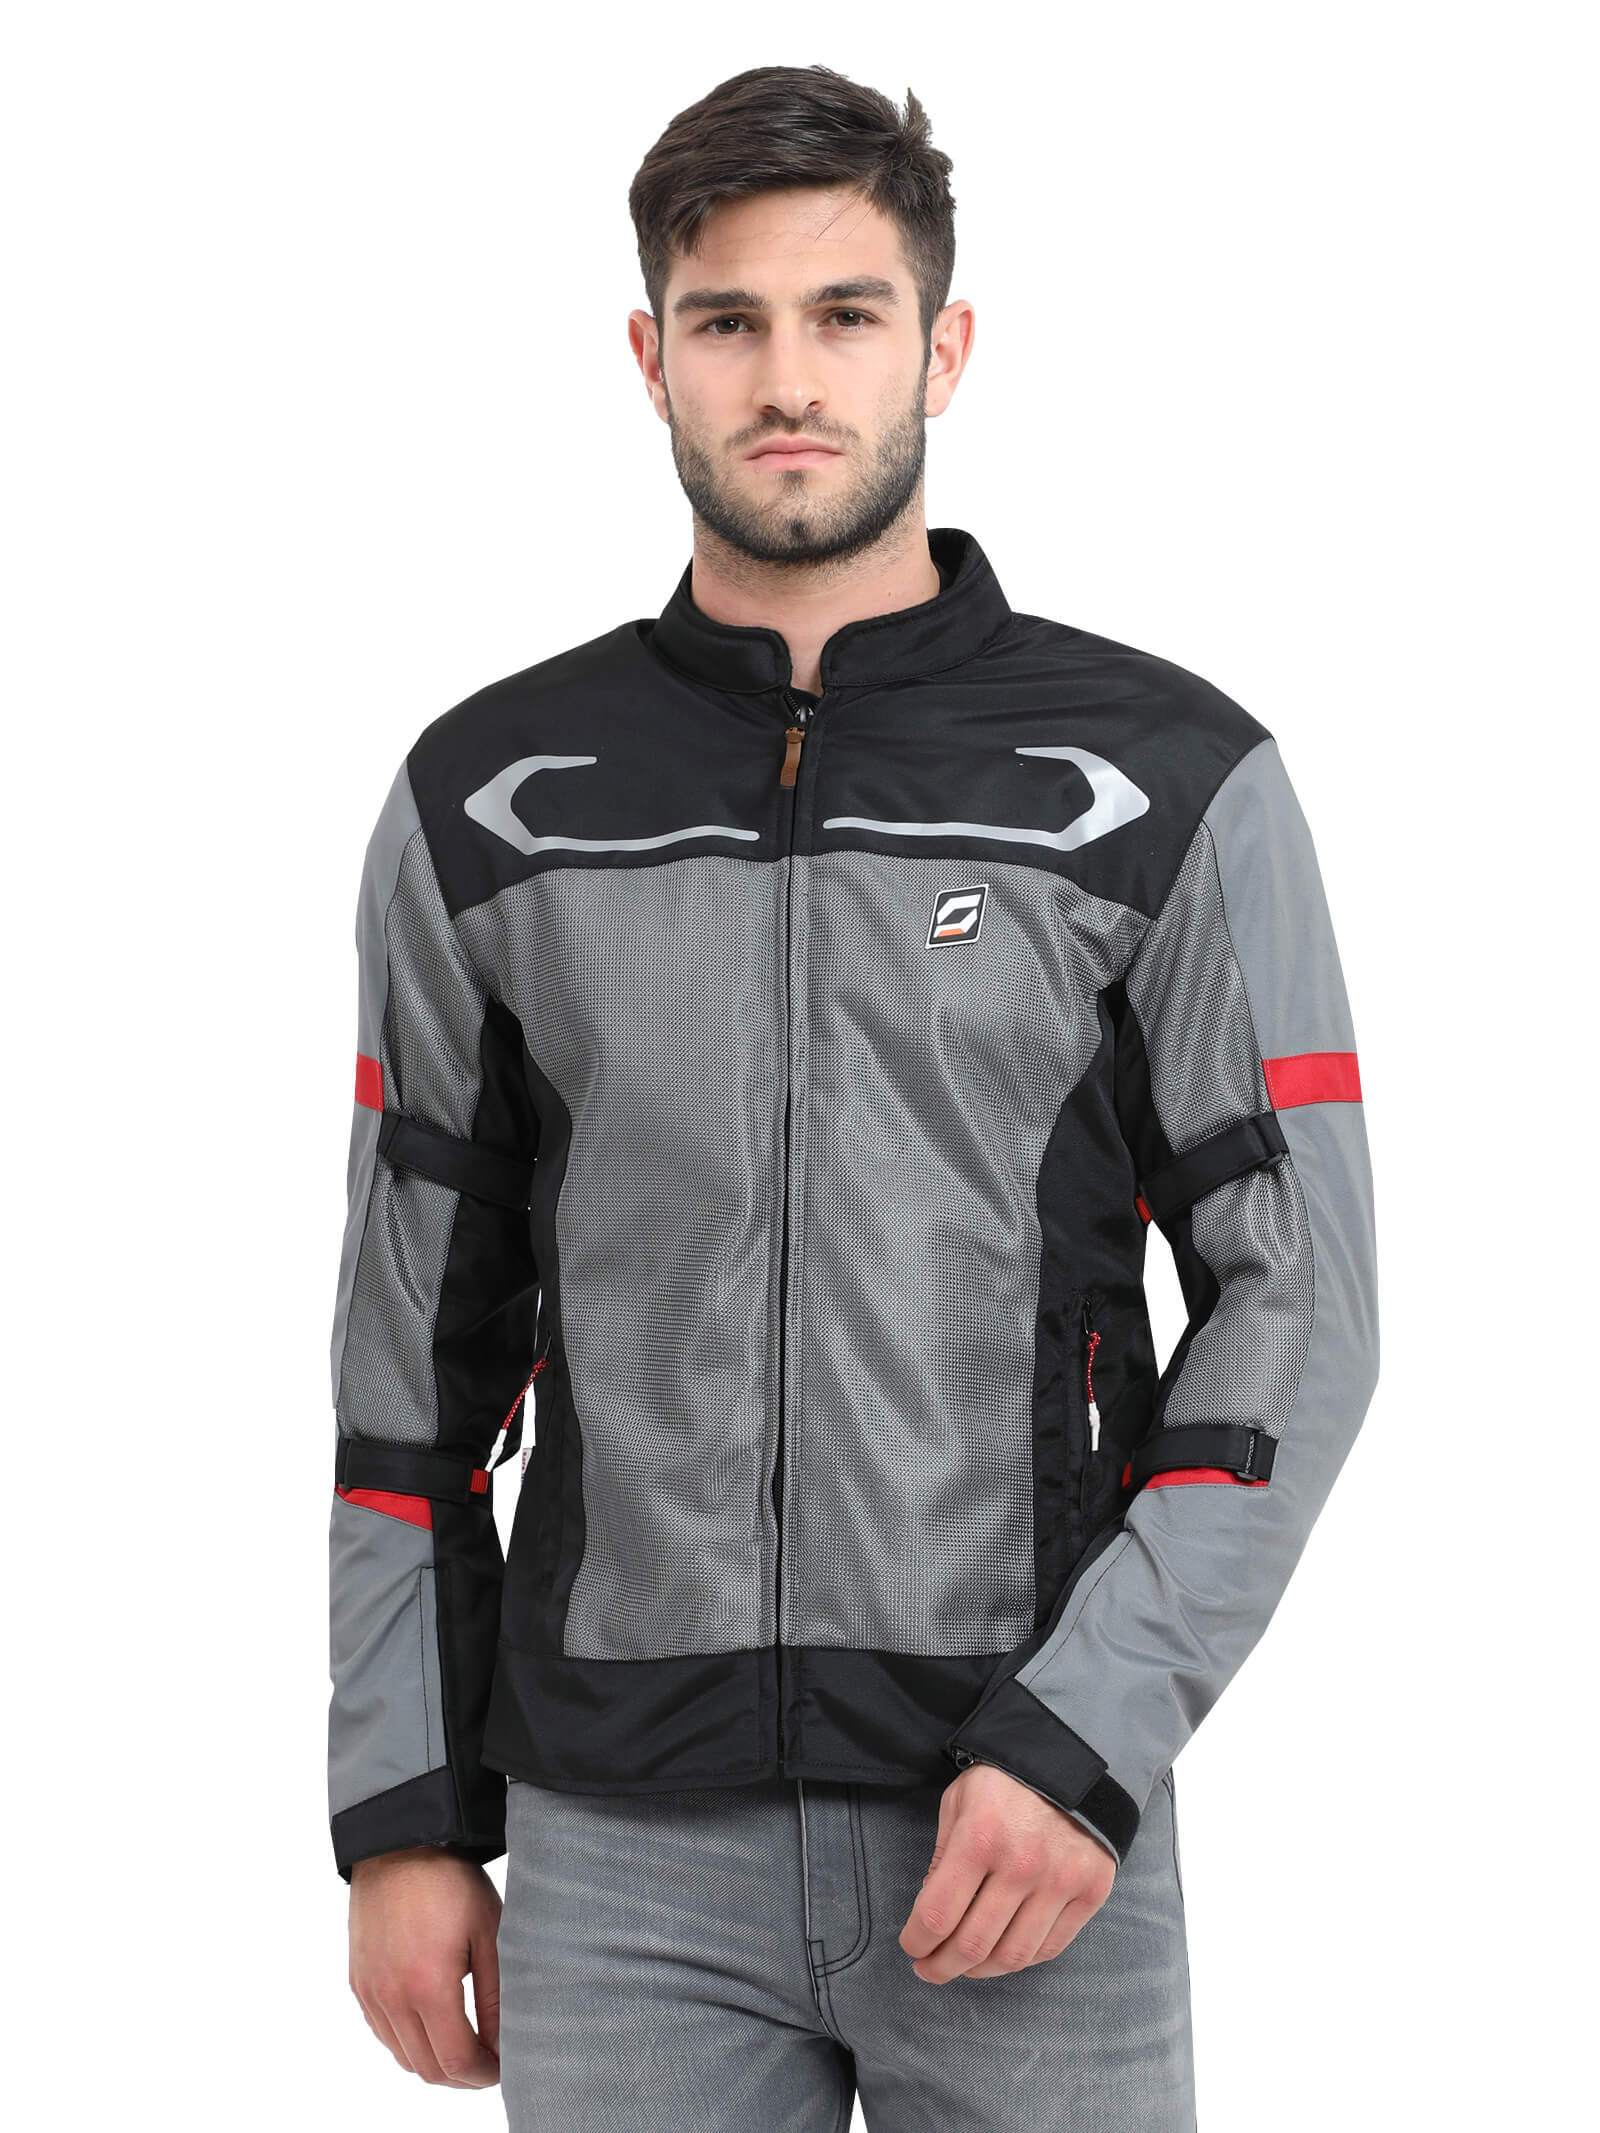 AIR-X Jacket v2 (GREY) - Solace Motorcycle Clothing Co - Official Website